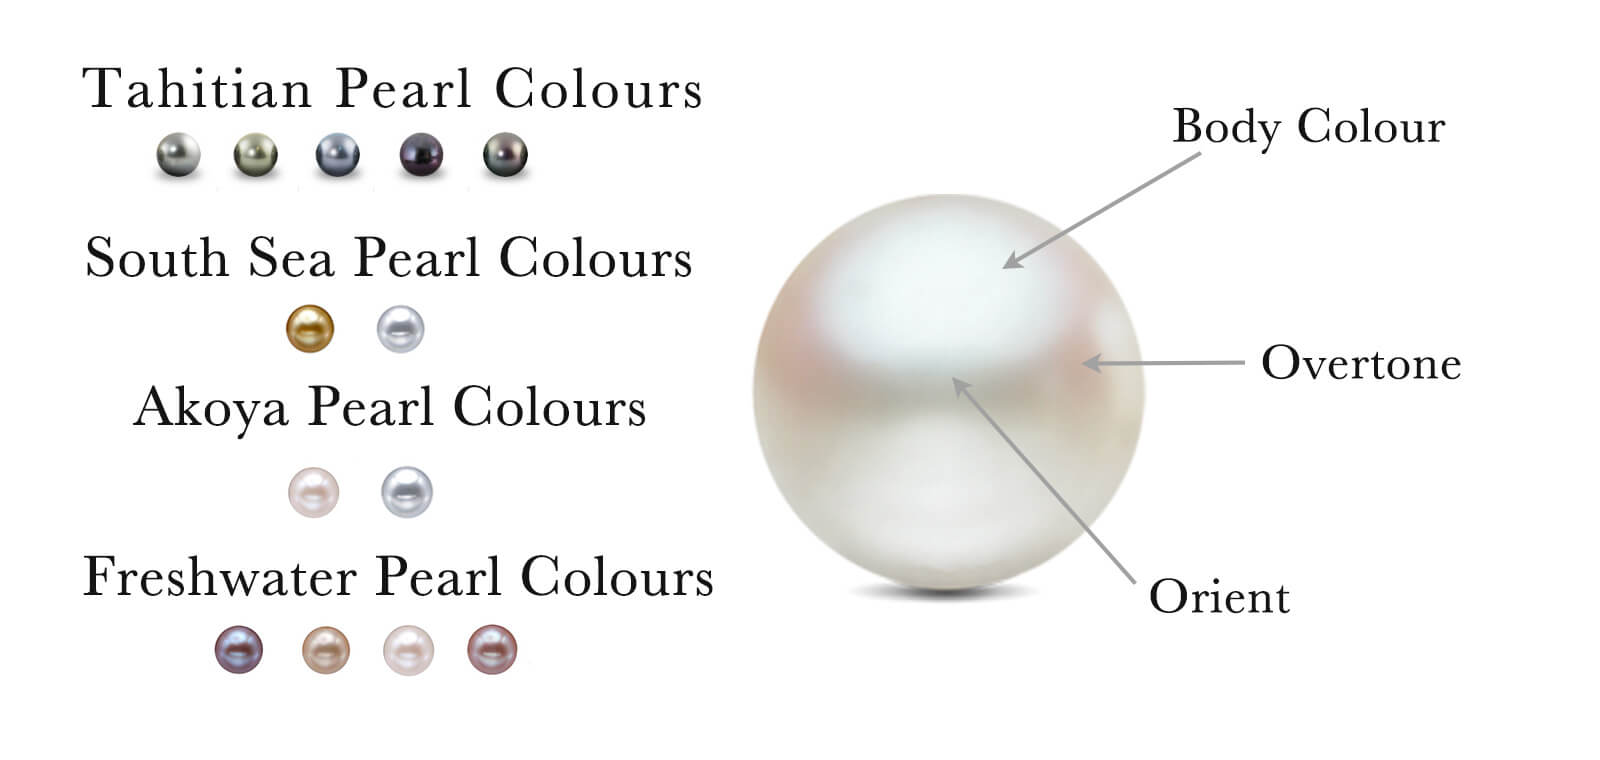 Expert Guide: 7 Valuable Tips to Identify Real Pearls from